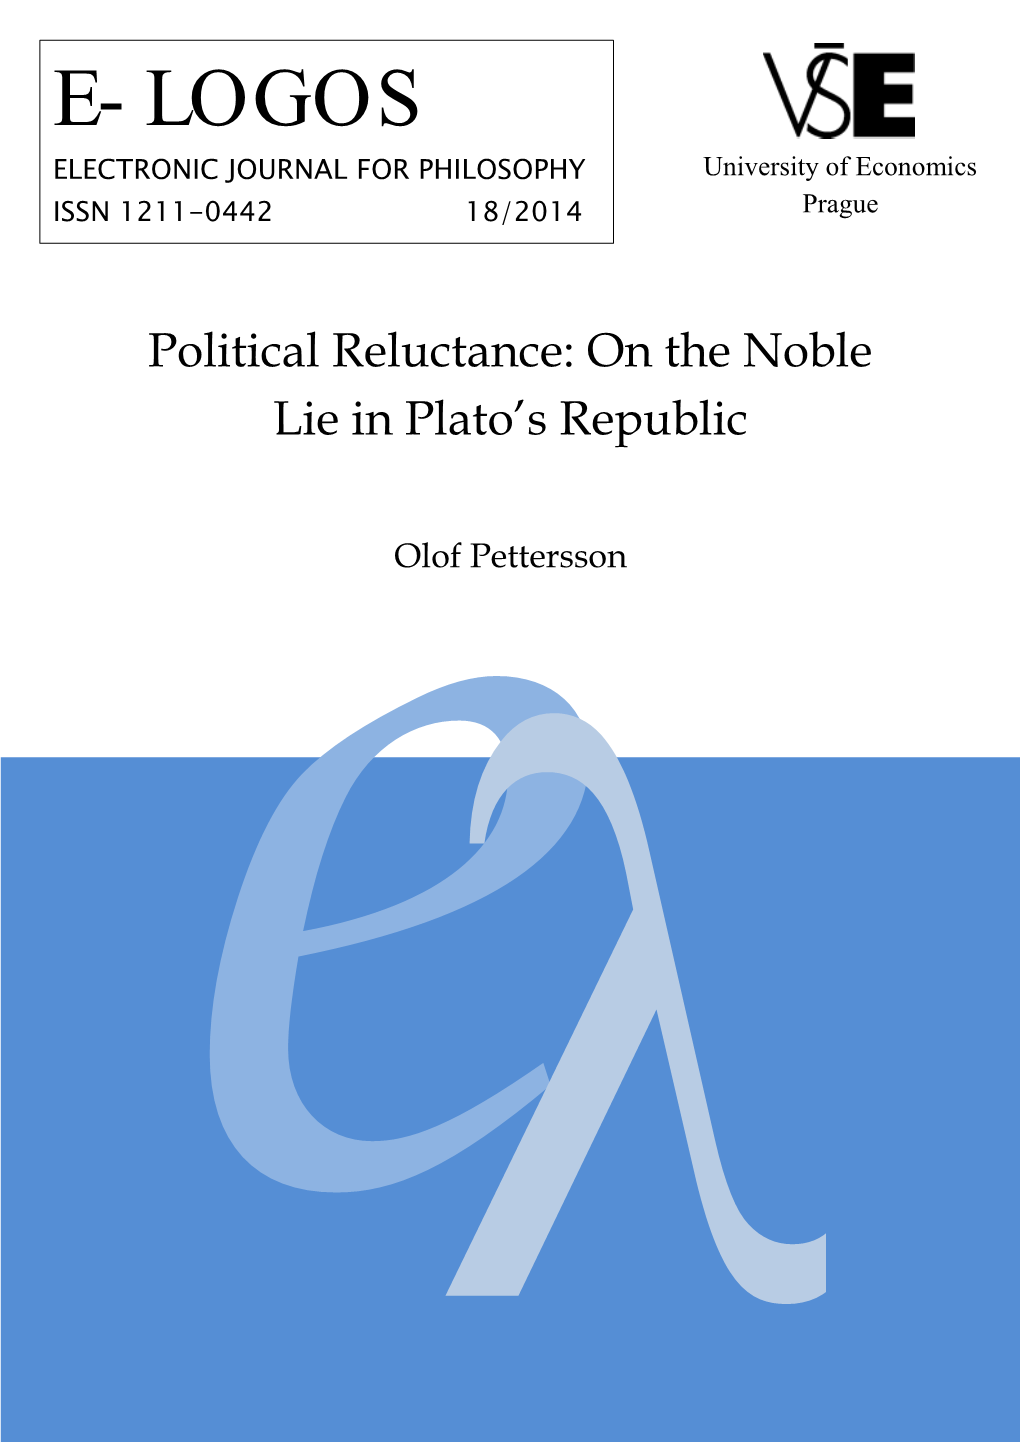 On the Noble Lie in Plato's Republic